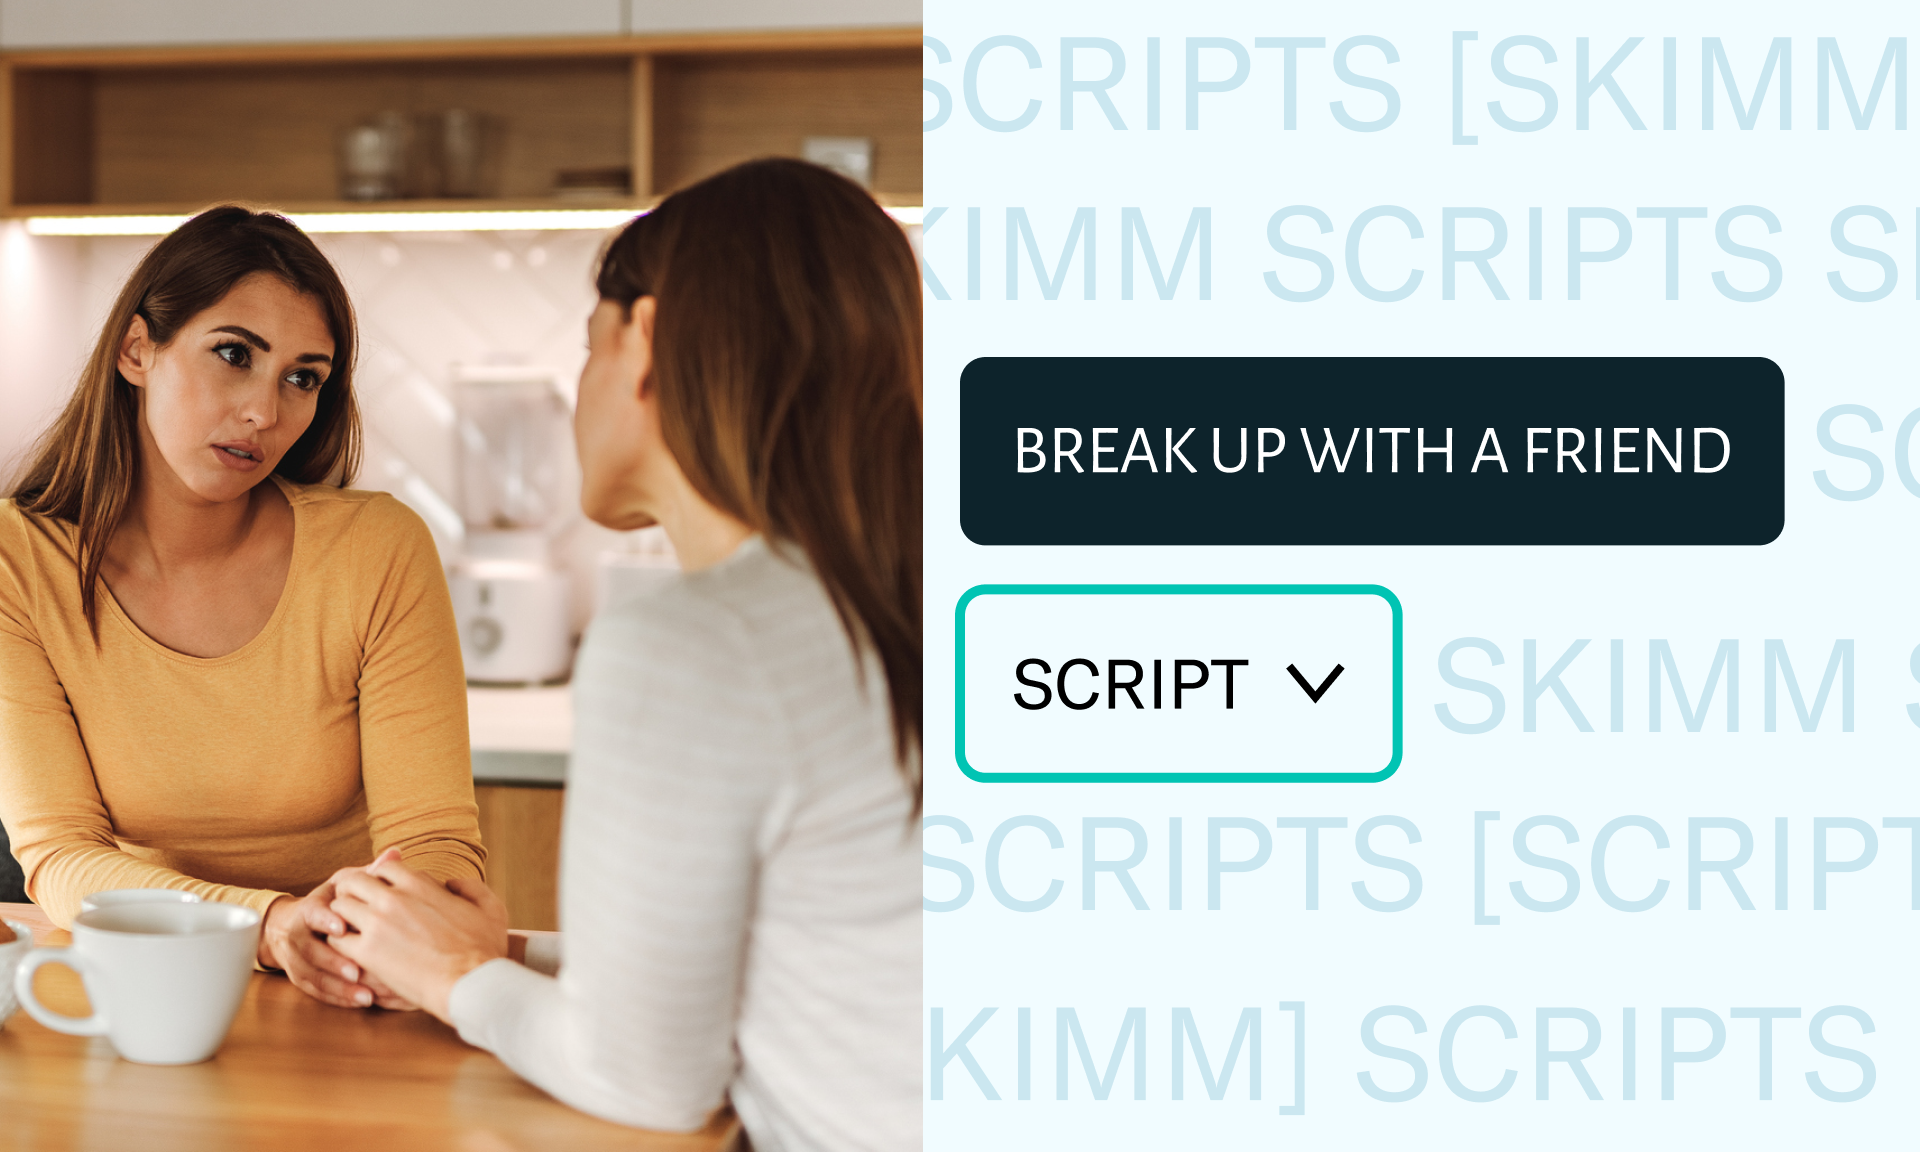 On the left: Two women having a conversation. On the right: Copy that says 'break up with a friend, script'